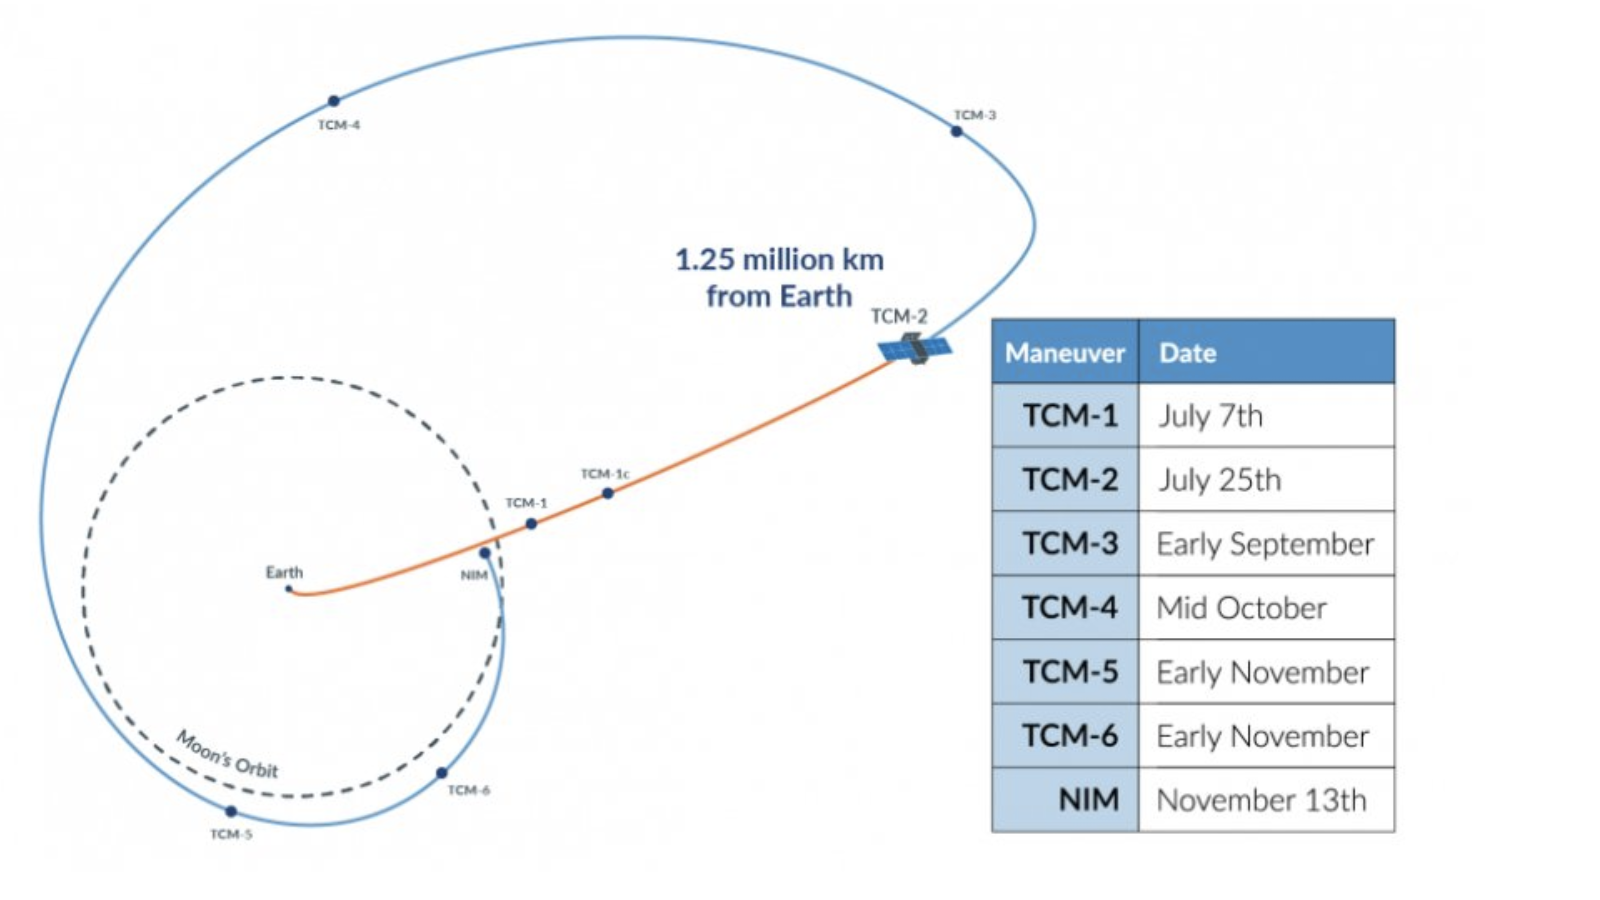 CAPSTONE needs to perform seven course corrections to reach its intended halo orbit around the Moon. The recent anomaly occurred either during or after the third trajectory manoeuvre on September 8. (Graphic: Advanced Space)